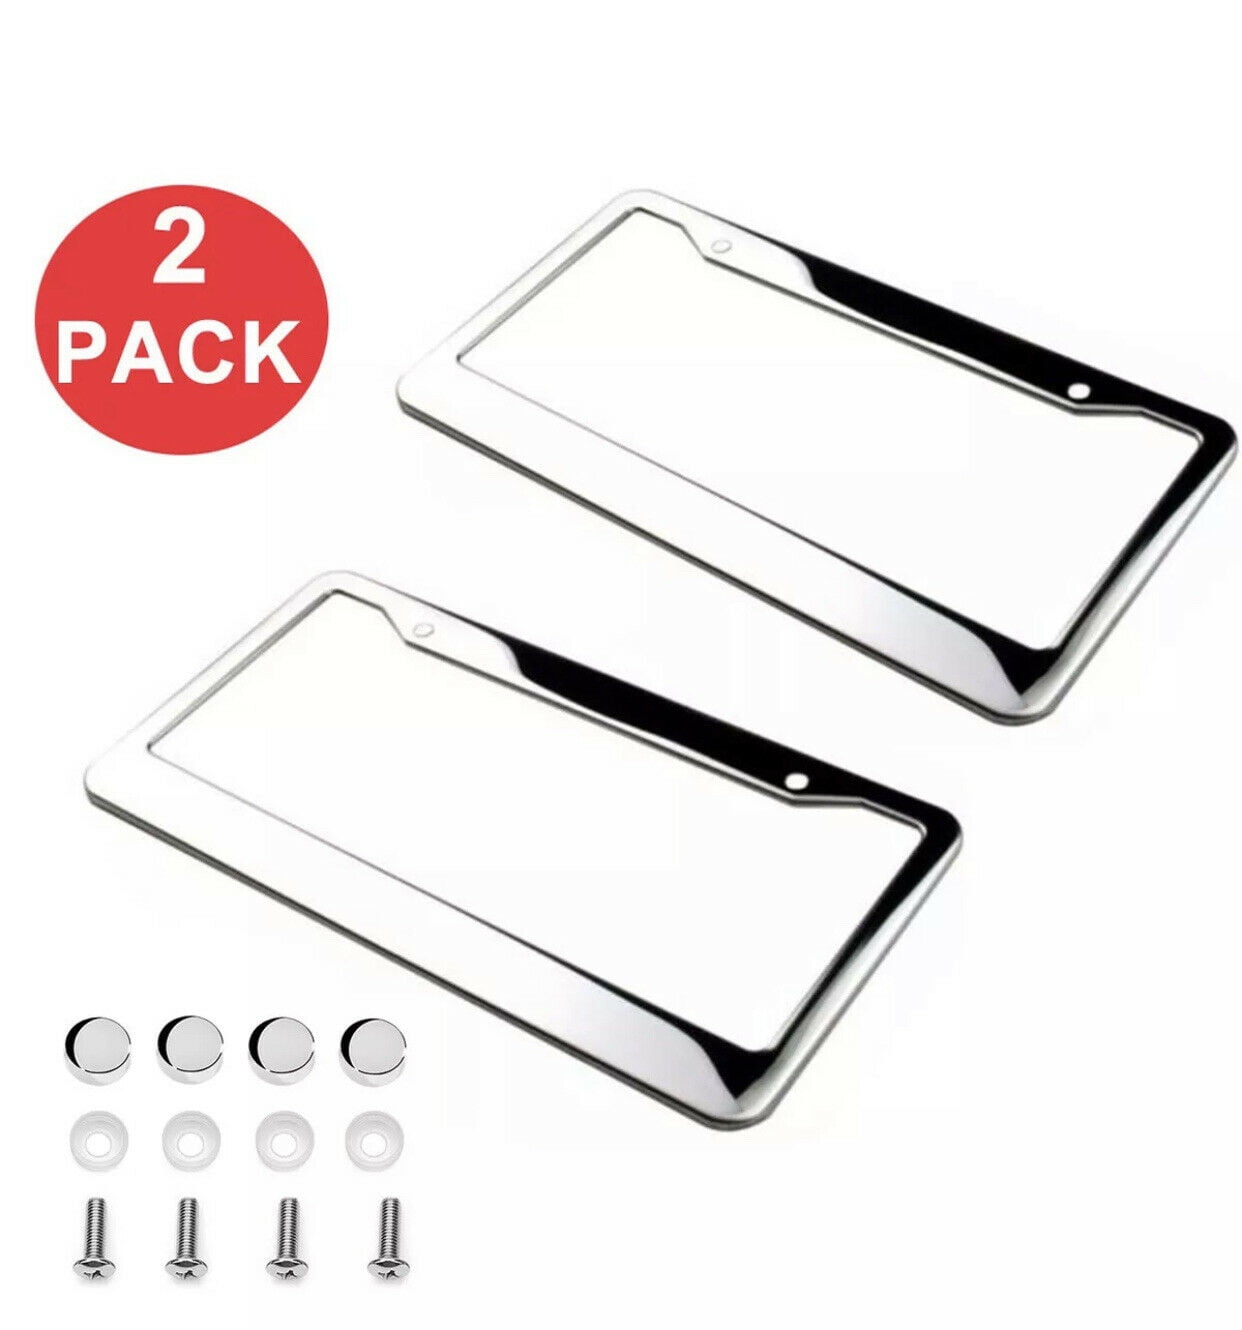 Chrome Teeth Motorcycle License Plate Tag Frame Kit Stainless Screws & Snap Caps 